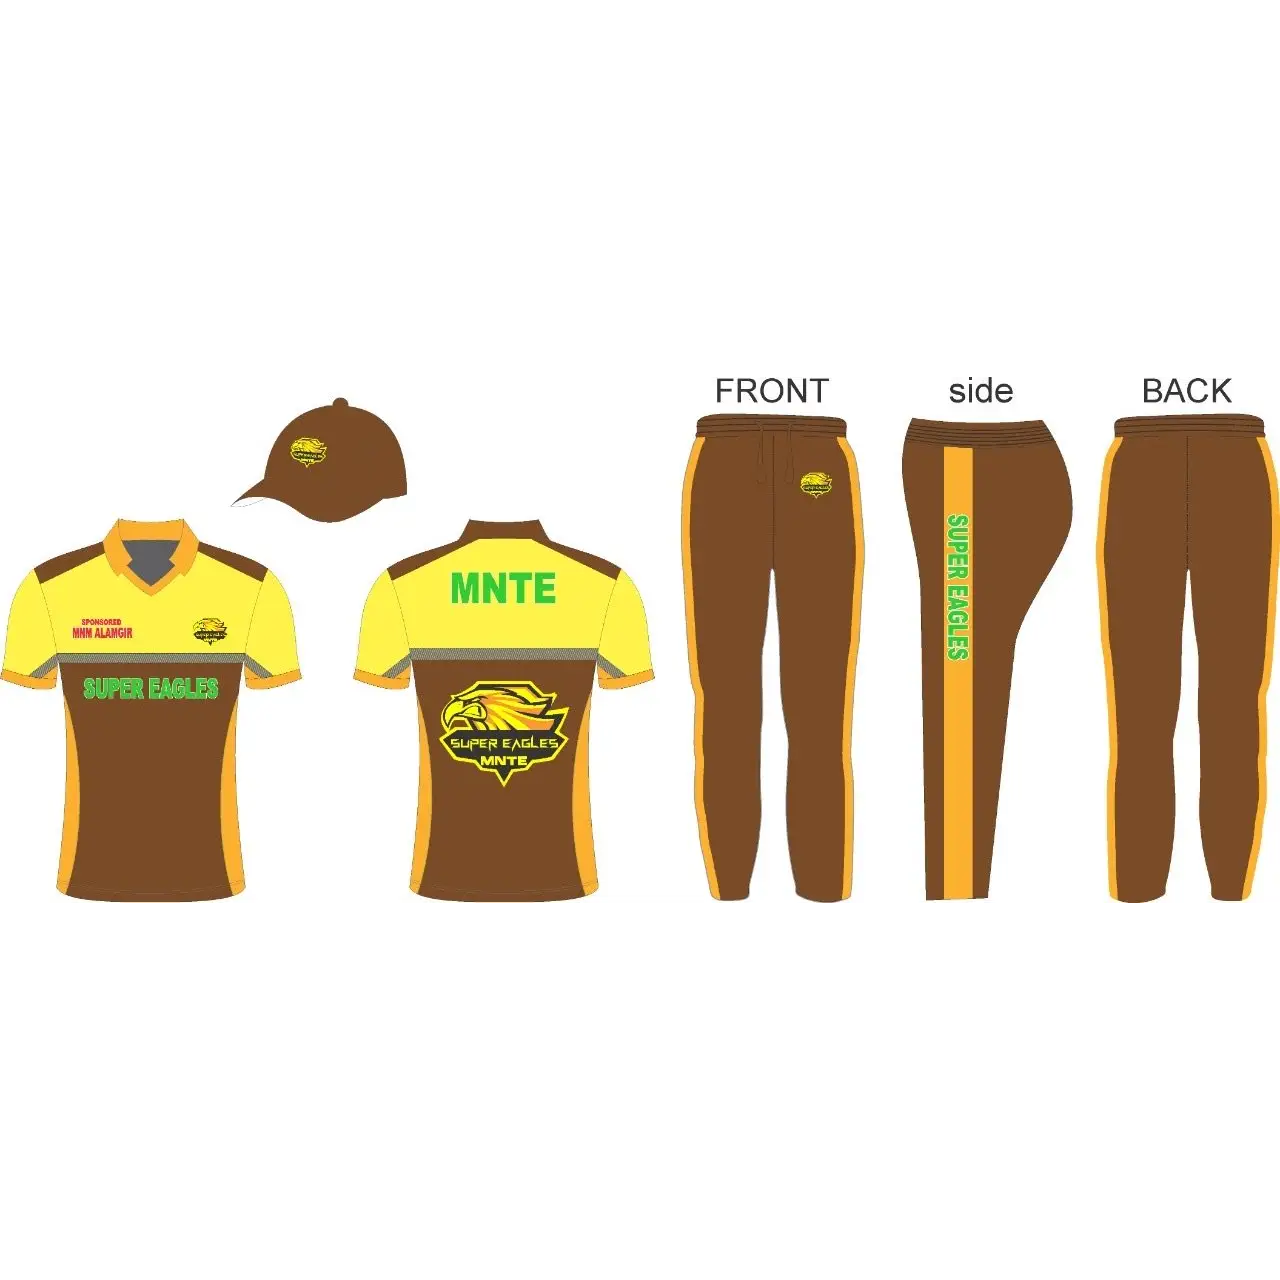 Cricket Color Clothing Kits Super Eagles Shirt Jersey Trouser Cap Brown Yellow - Custom Cricket Wear 3PC Full